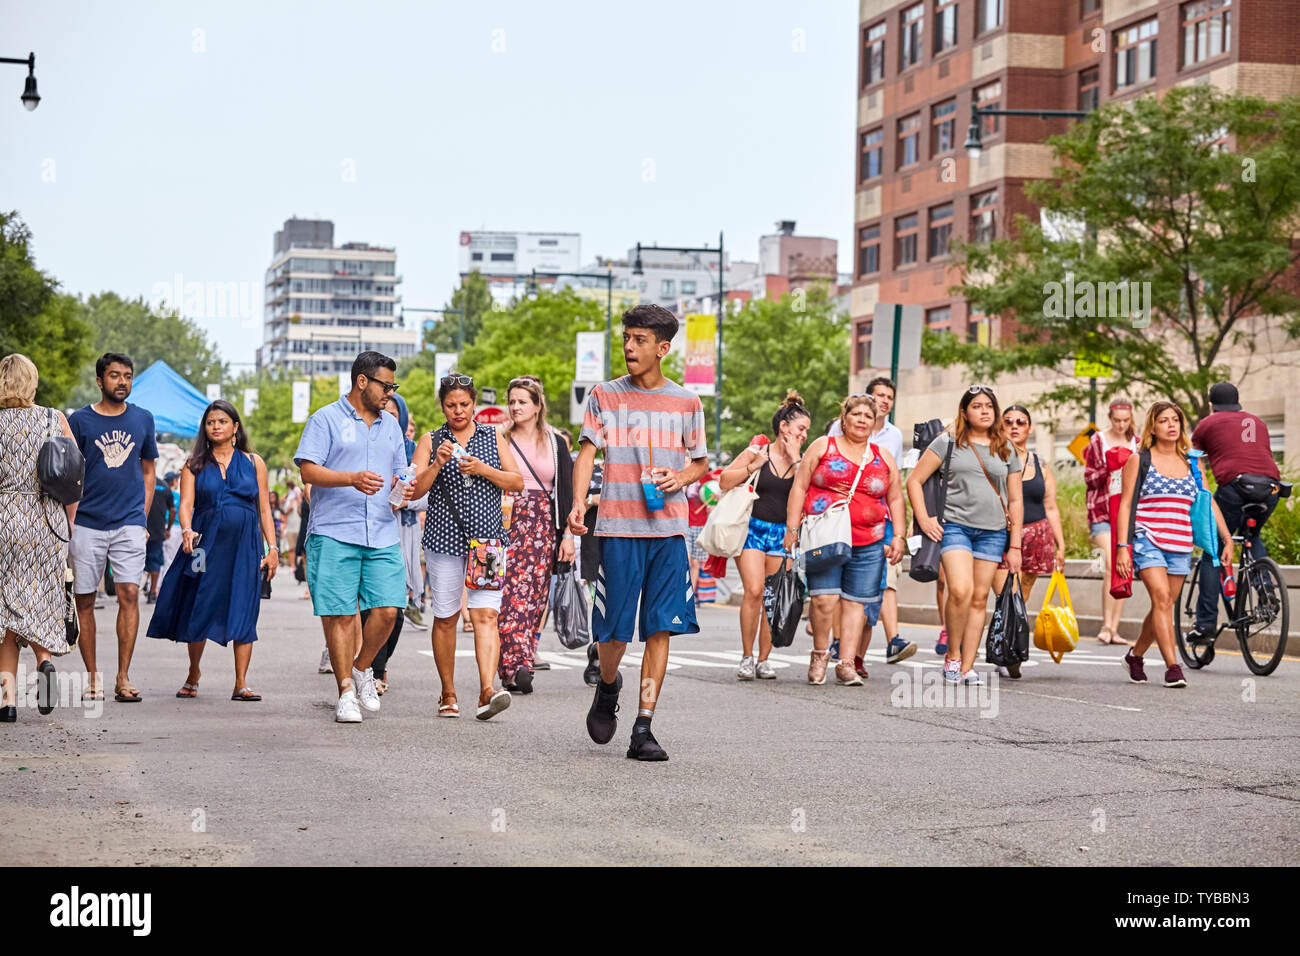 New York, USA - July 04, 2018: People walk to see 4th of July fireworks in the Gantry Plaza State Park during federal holiday in the United States com Stock Photo